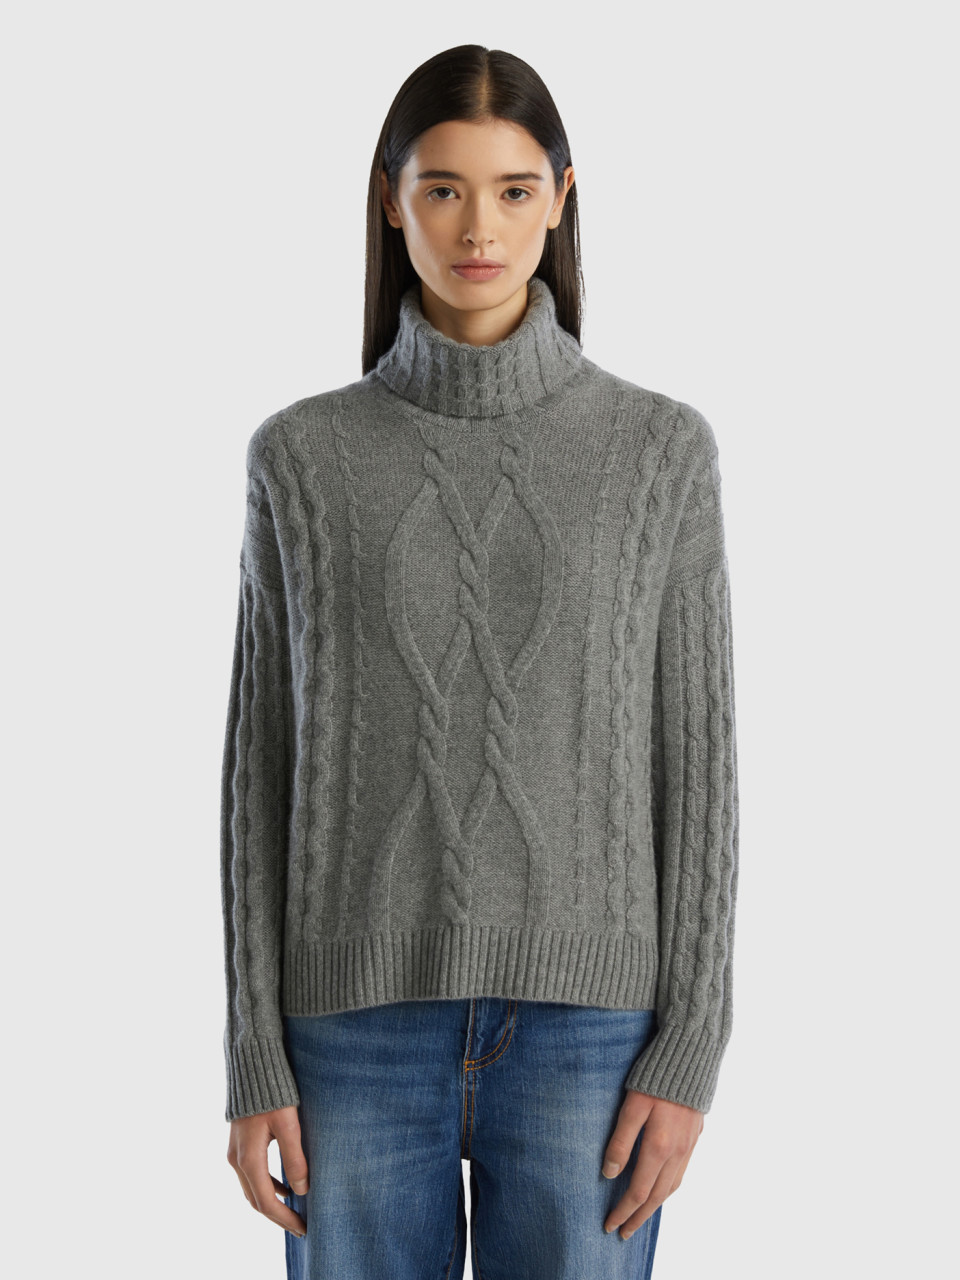 Benetton, Pure Cashmere Turtleneck With Cable Knit, Dark Gray, Women